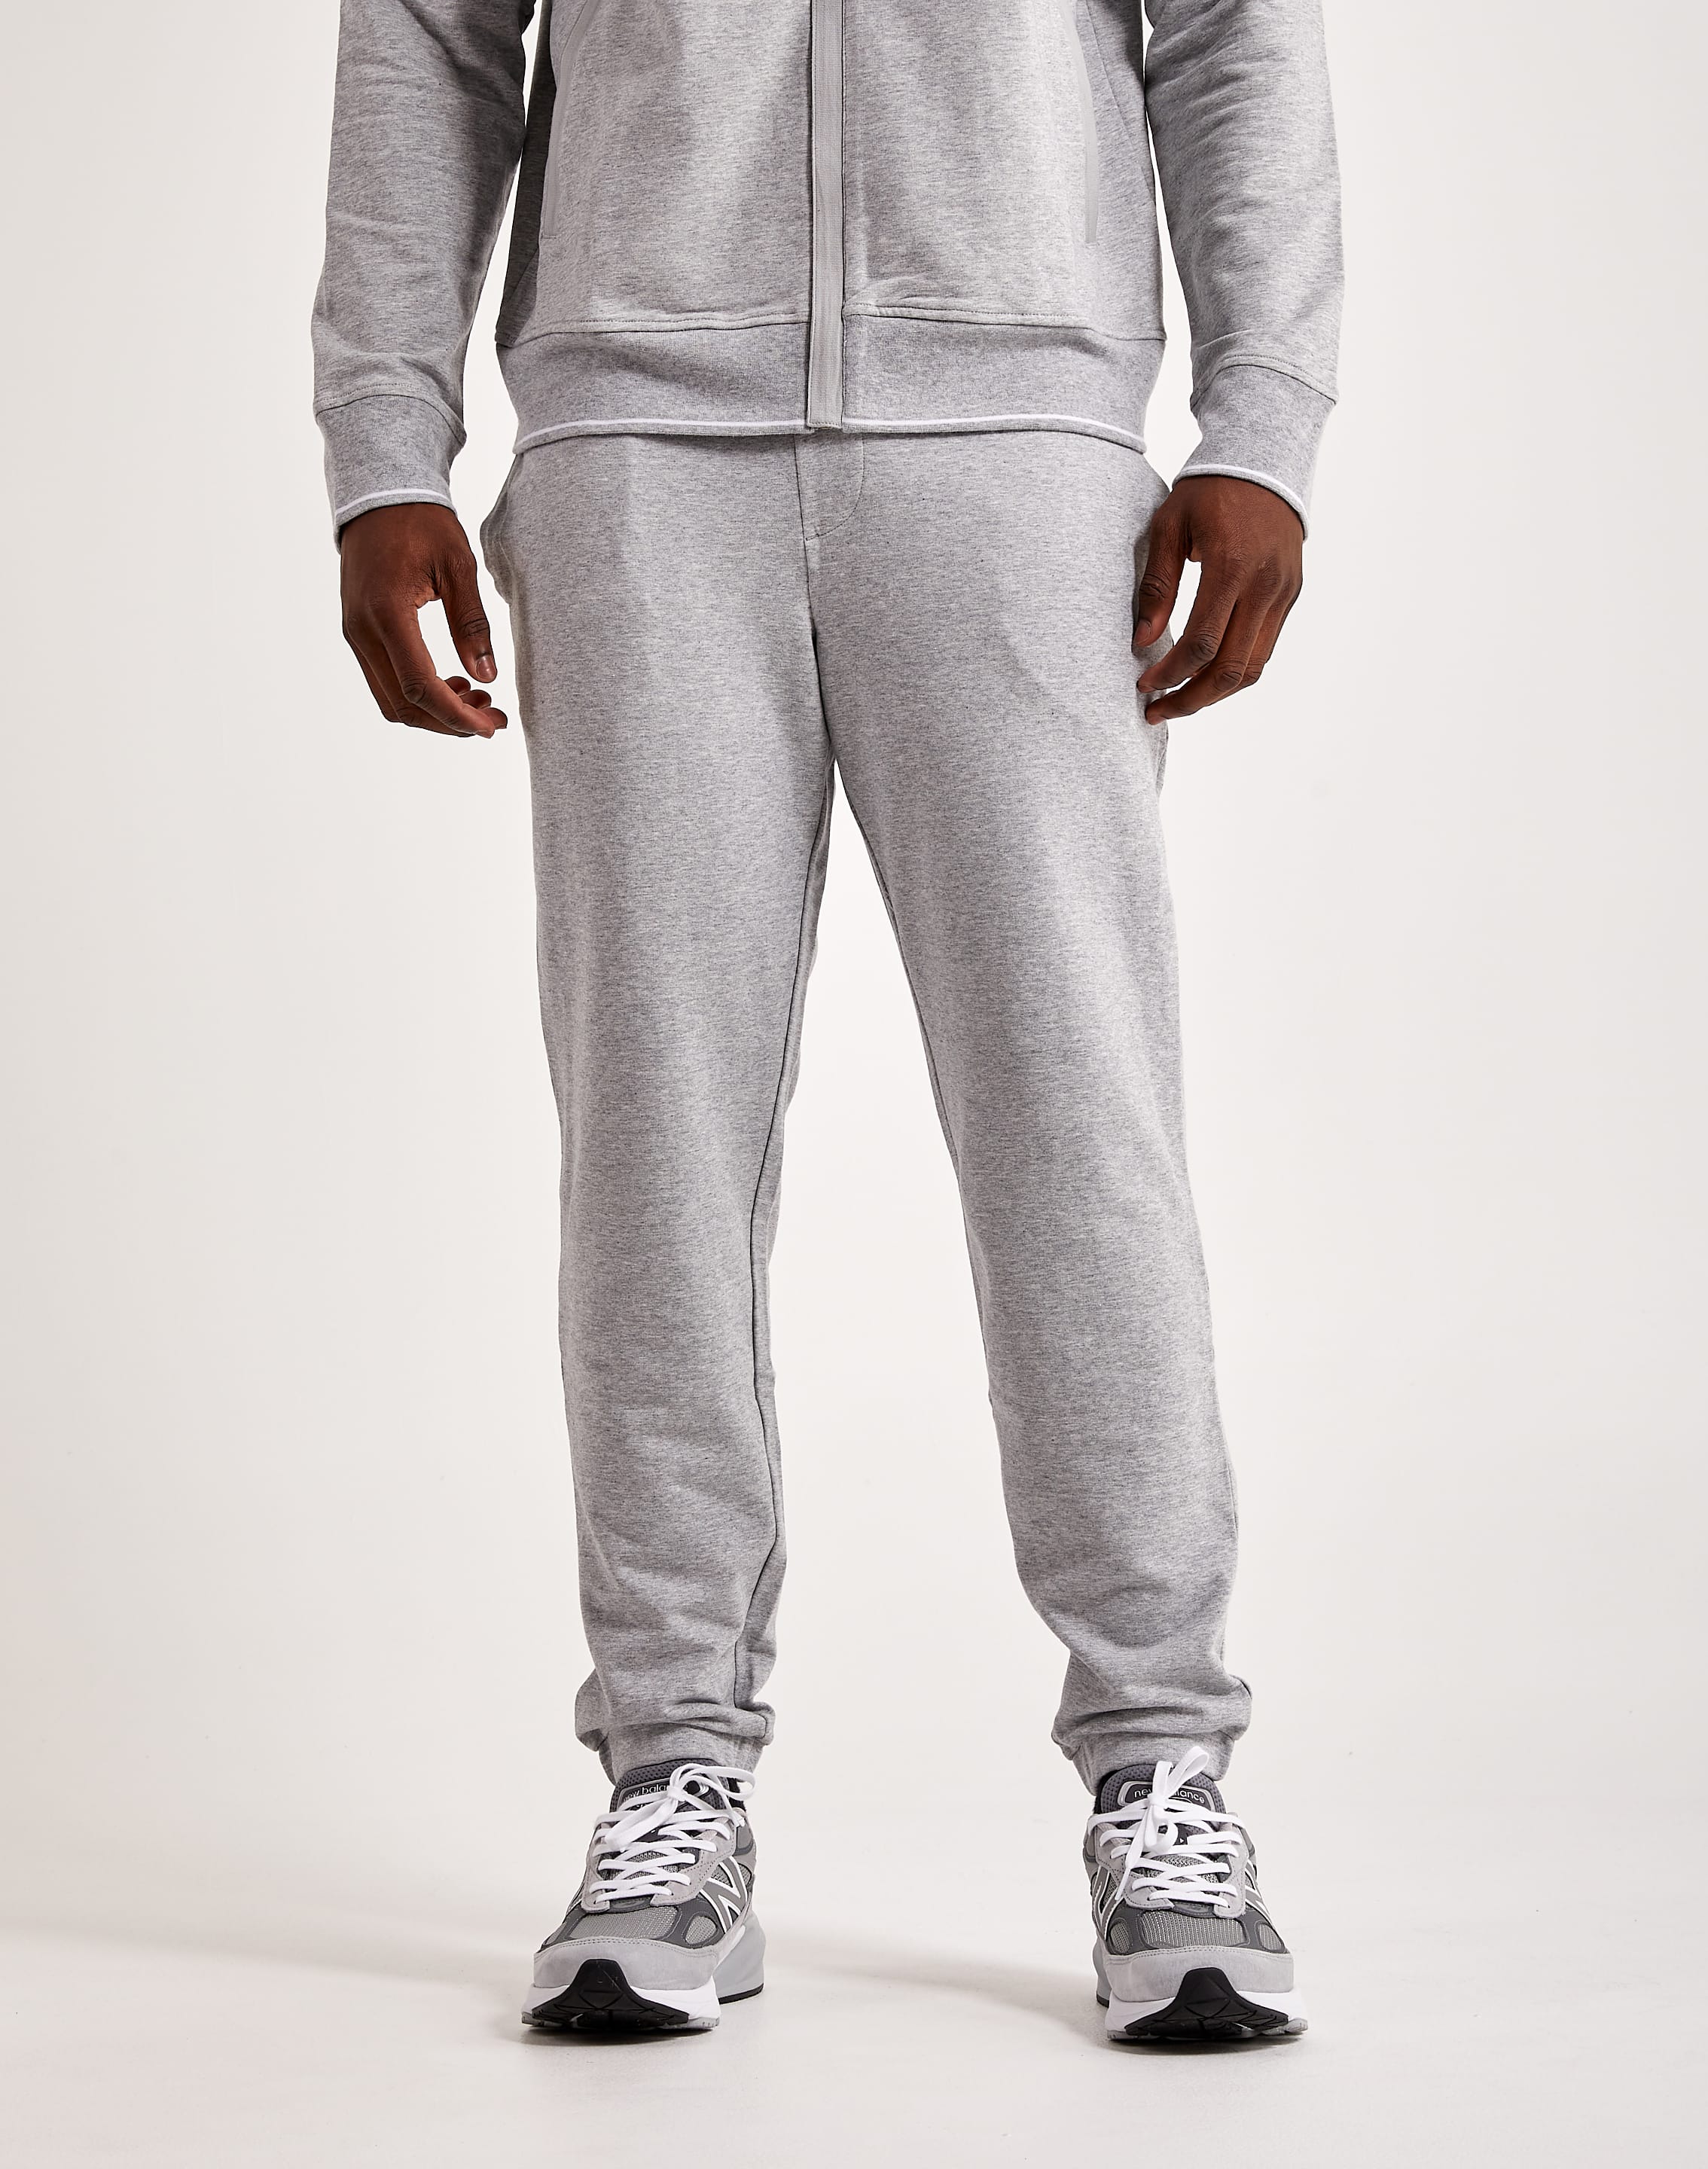 Armani Exchange French Terry Sweatpants – DTLR